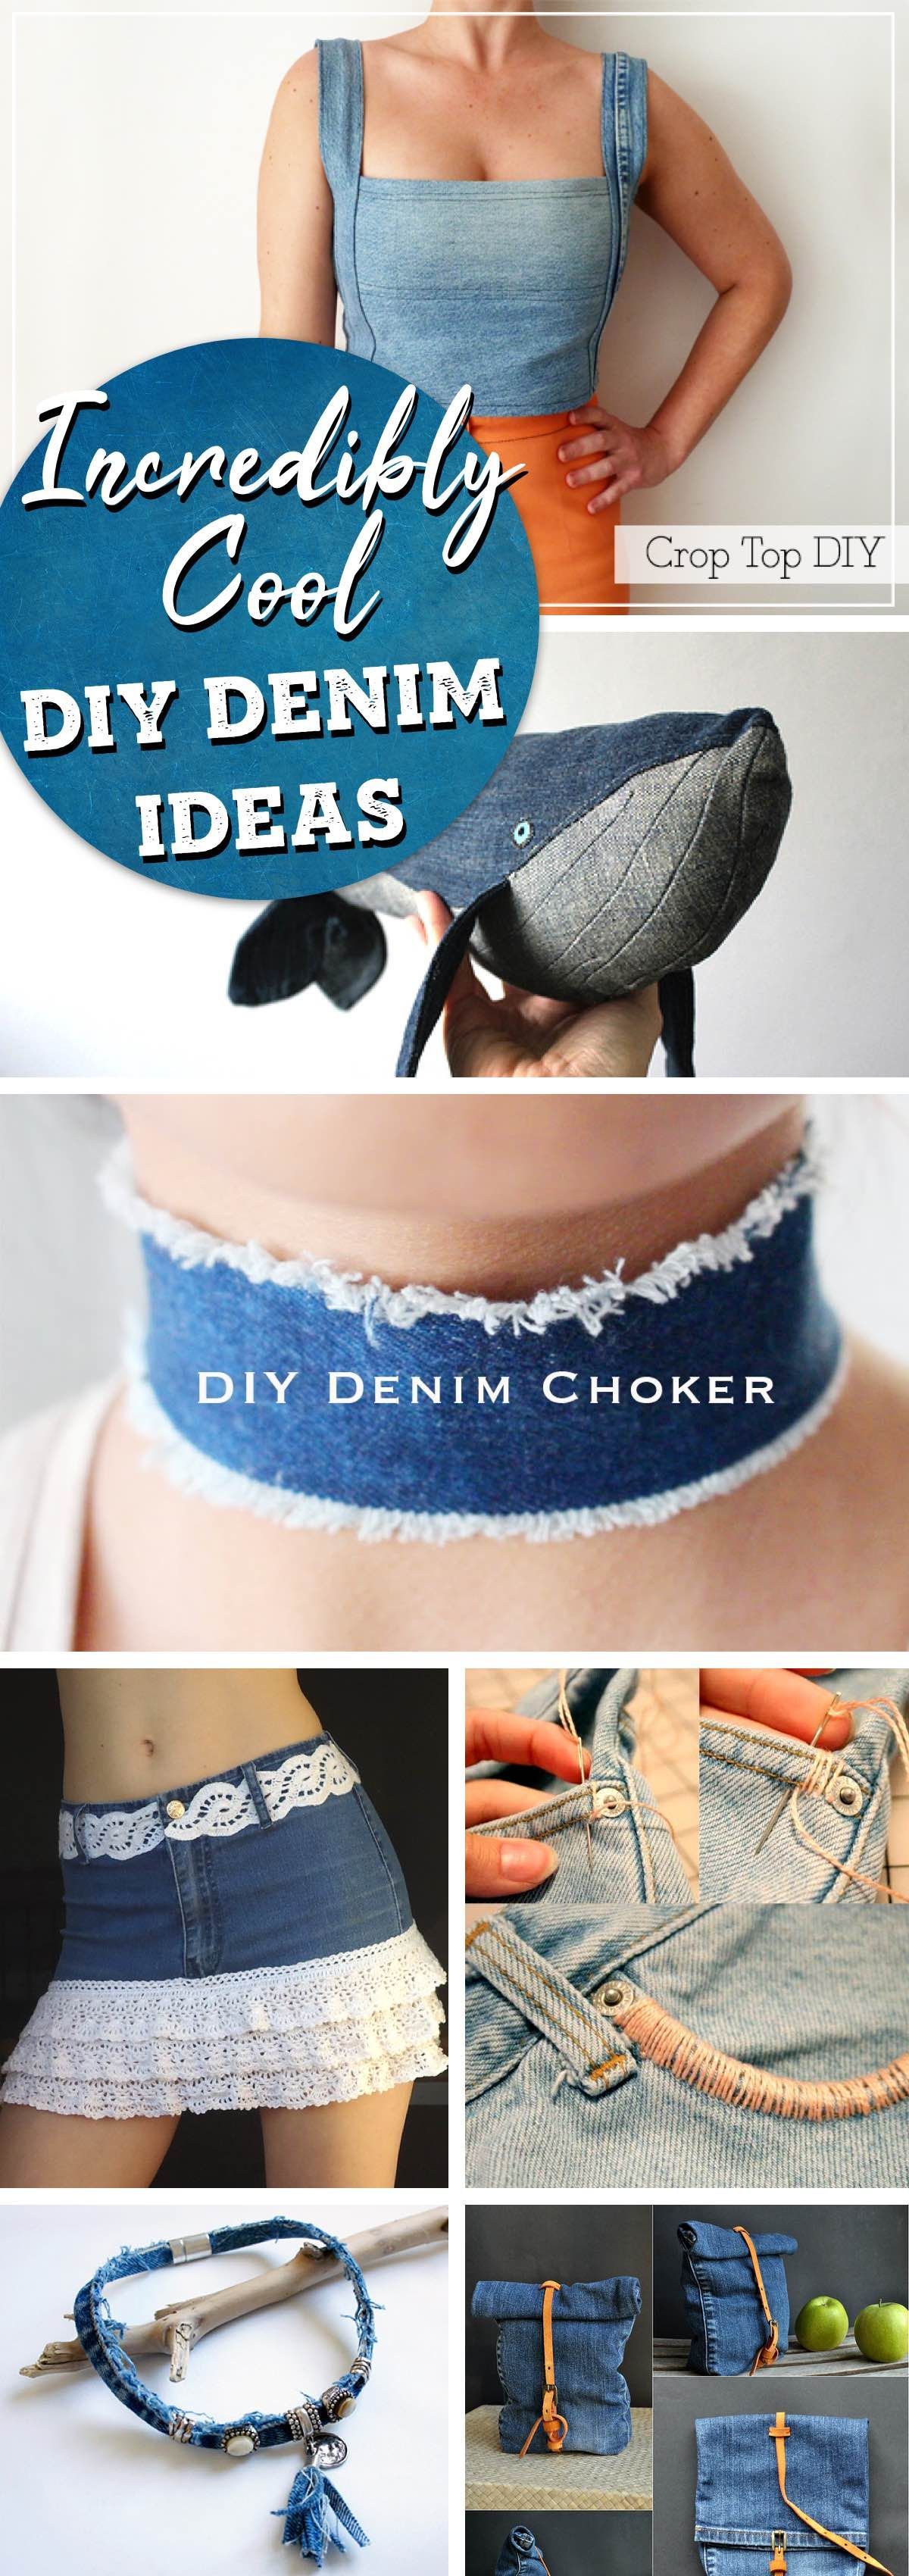 22 Incredibly Cool DIY Denim Ideas Ranging from Organization to Accessories! -   17 DIY Clothes money ideas